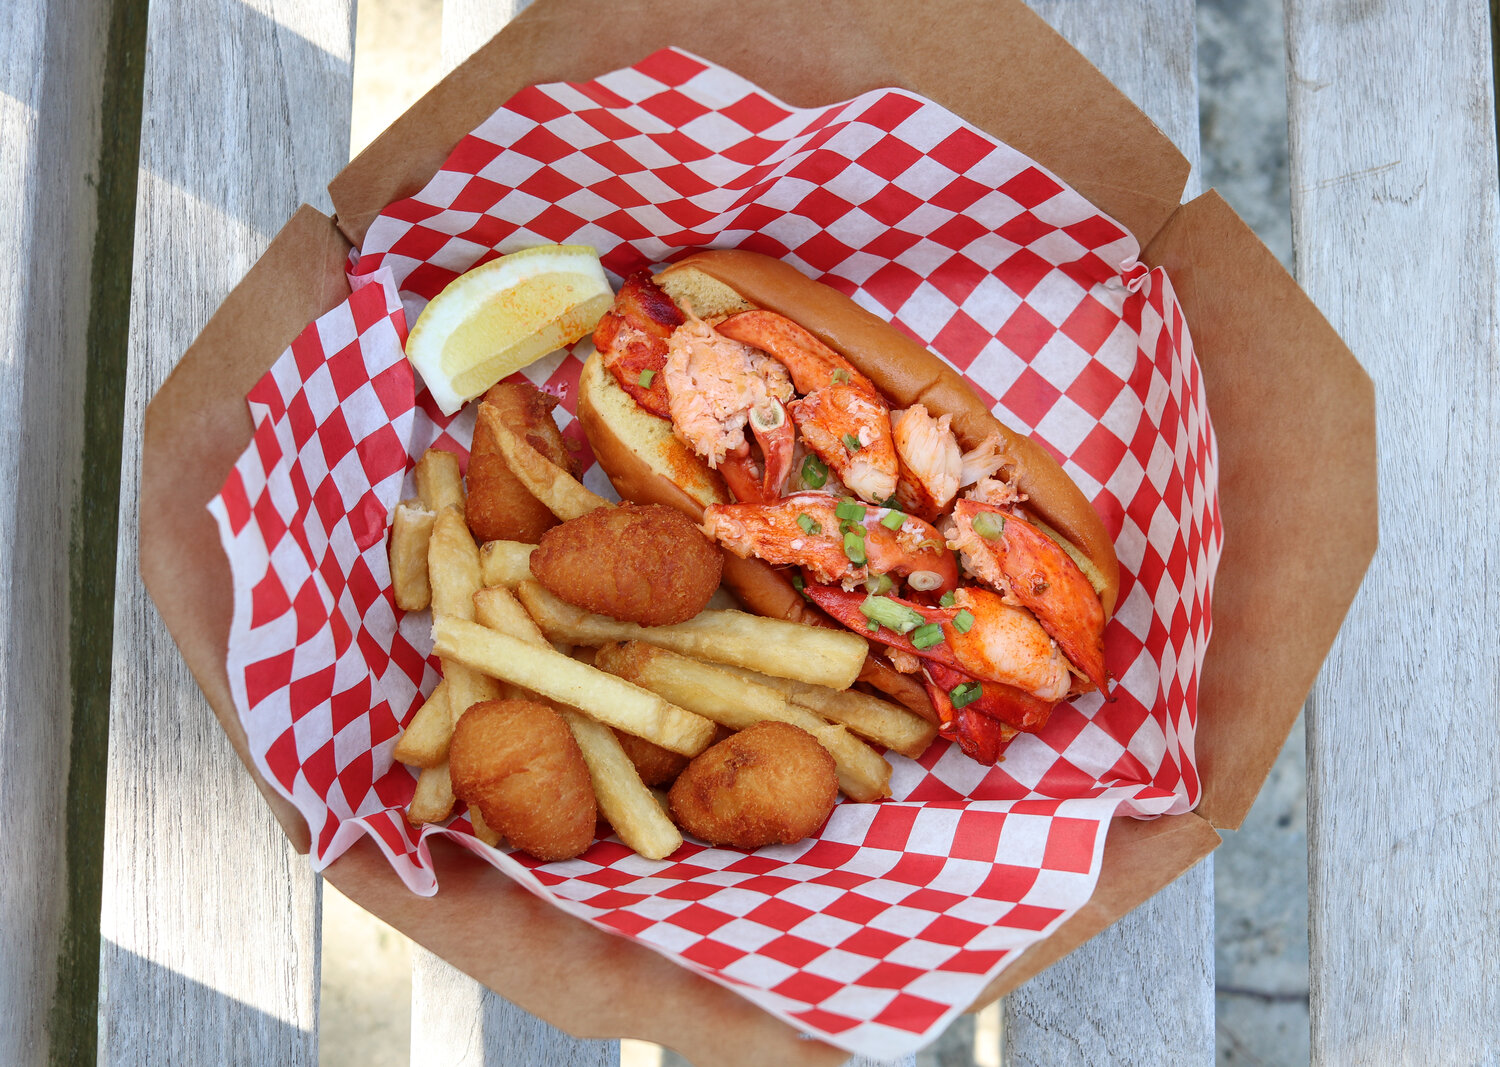 Garden Catering In Old Greenwich Opens Pop-up Seafood Shack Ct Bites